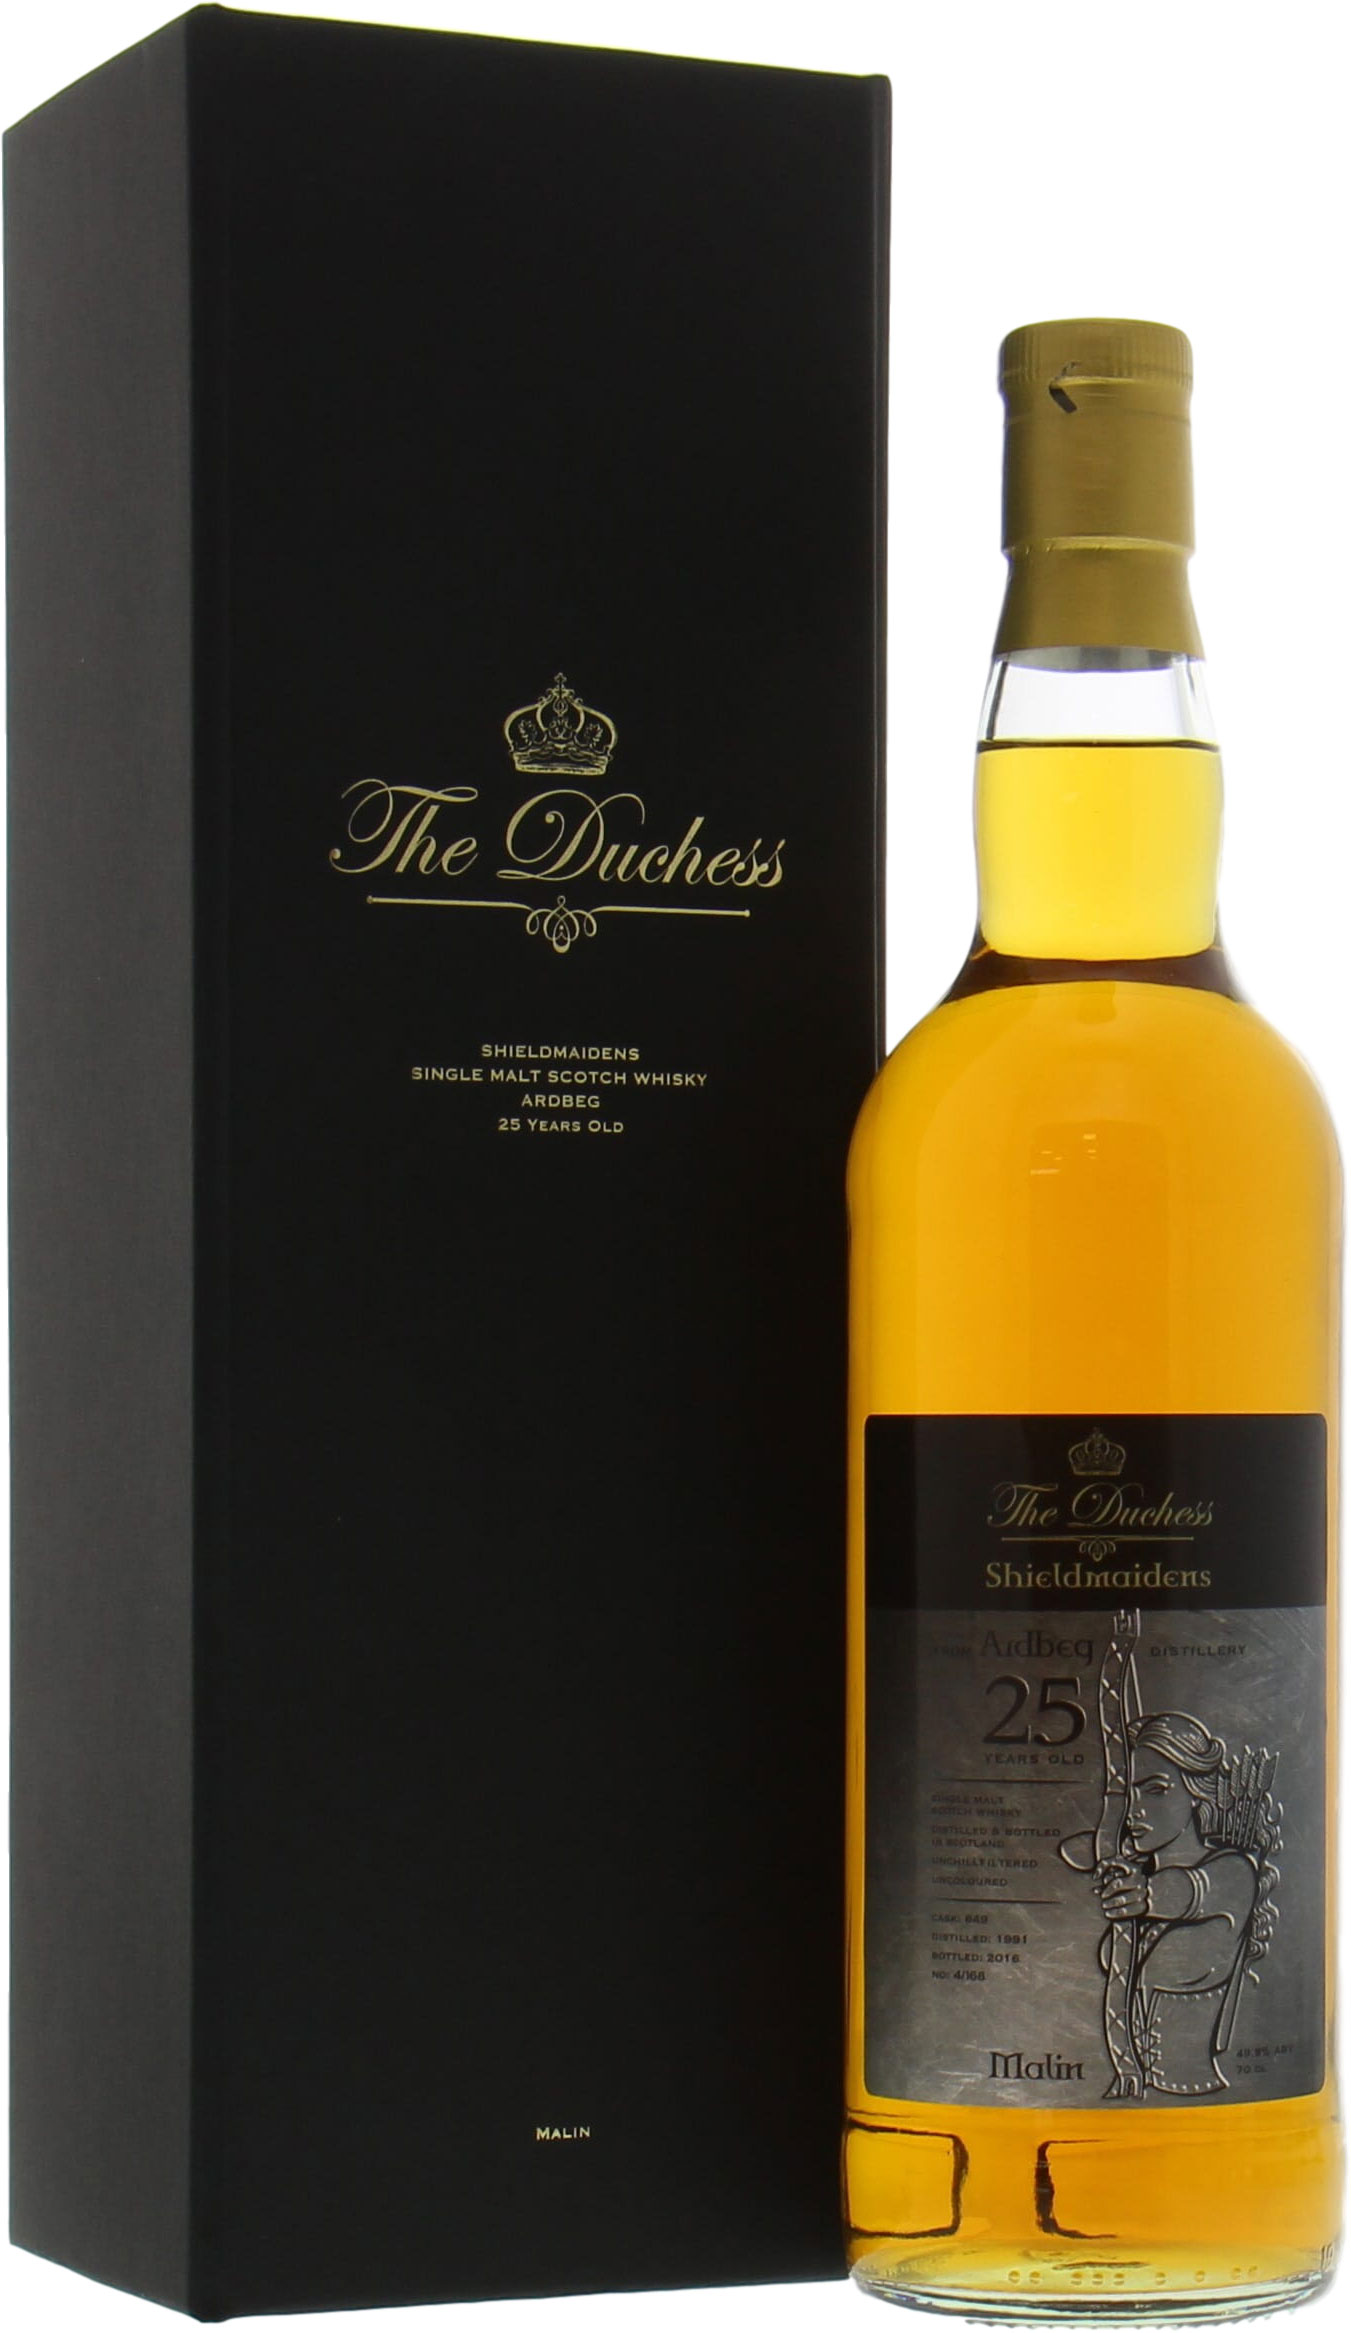 Ardbeg - 25 Years Old The Duchess Shieldmaiden Malin Cask:649 49,8% 1991 In Original Container